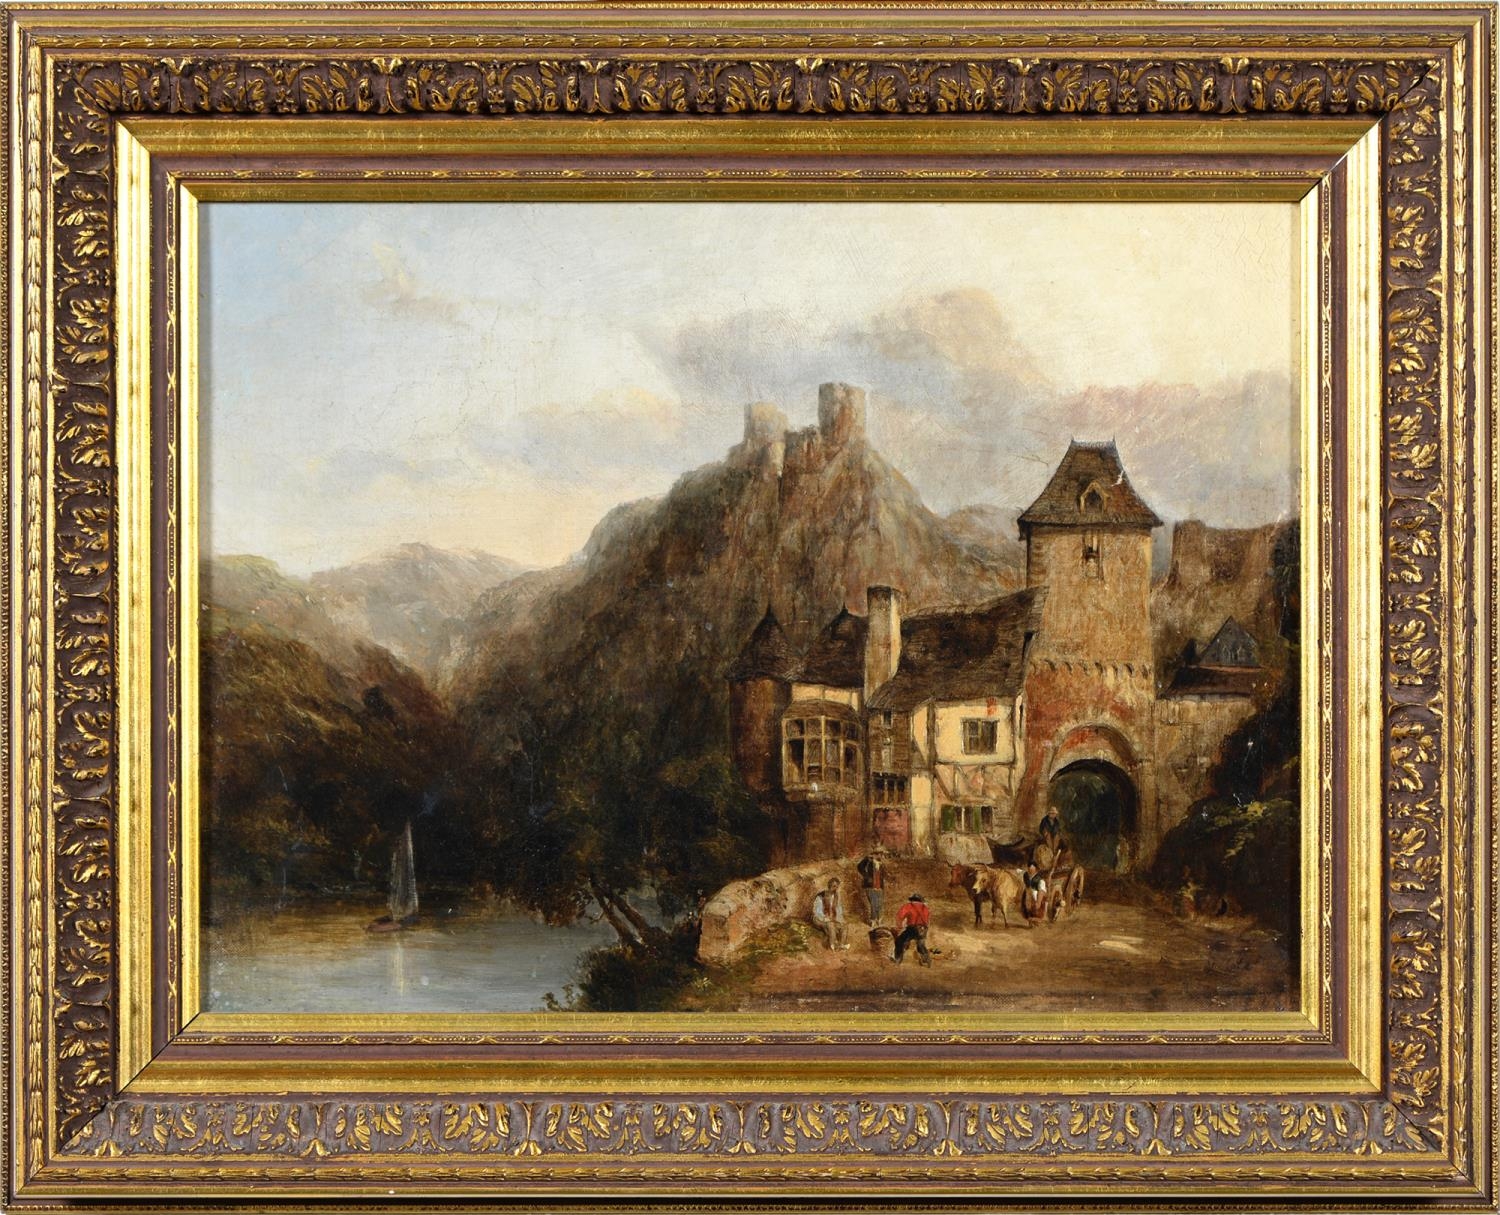 English School, 19th c - Continental Mountainous Landscape with Peasants by a Fortified Gate, - Image 2 of 3